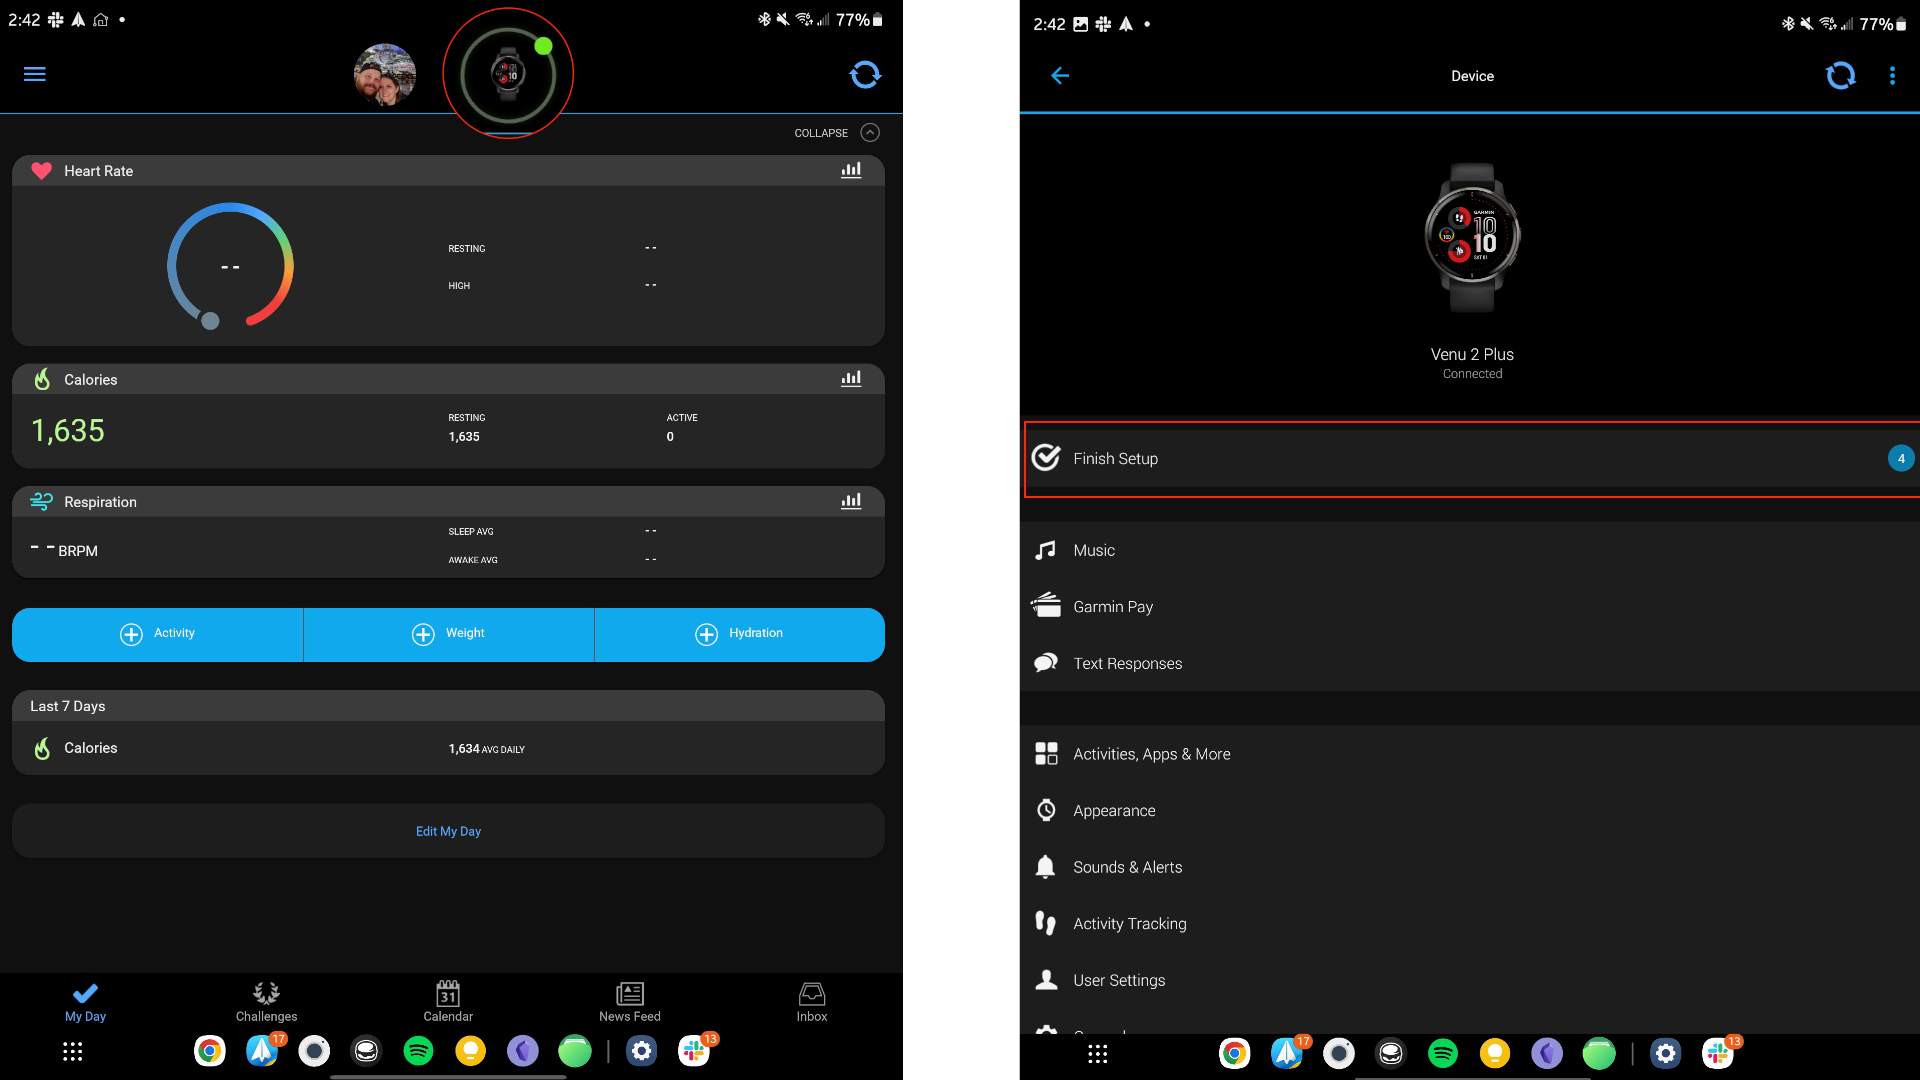 Screenshots showing the step-by-step process for adding the ECG app to the Garmin Venu 2 Plus.